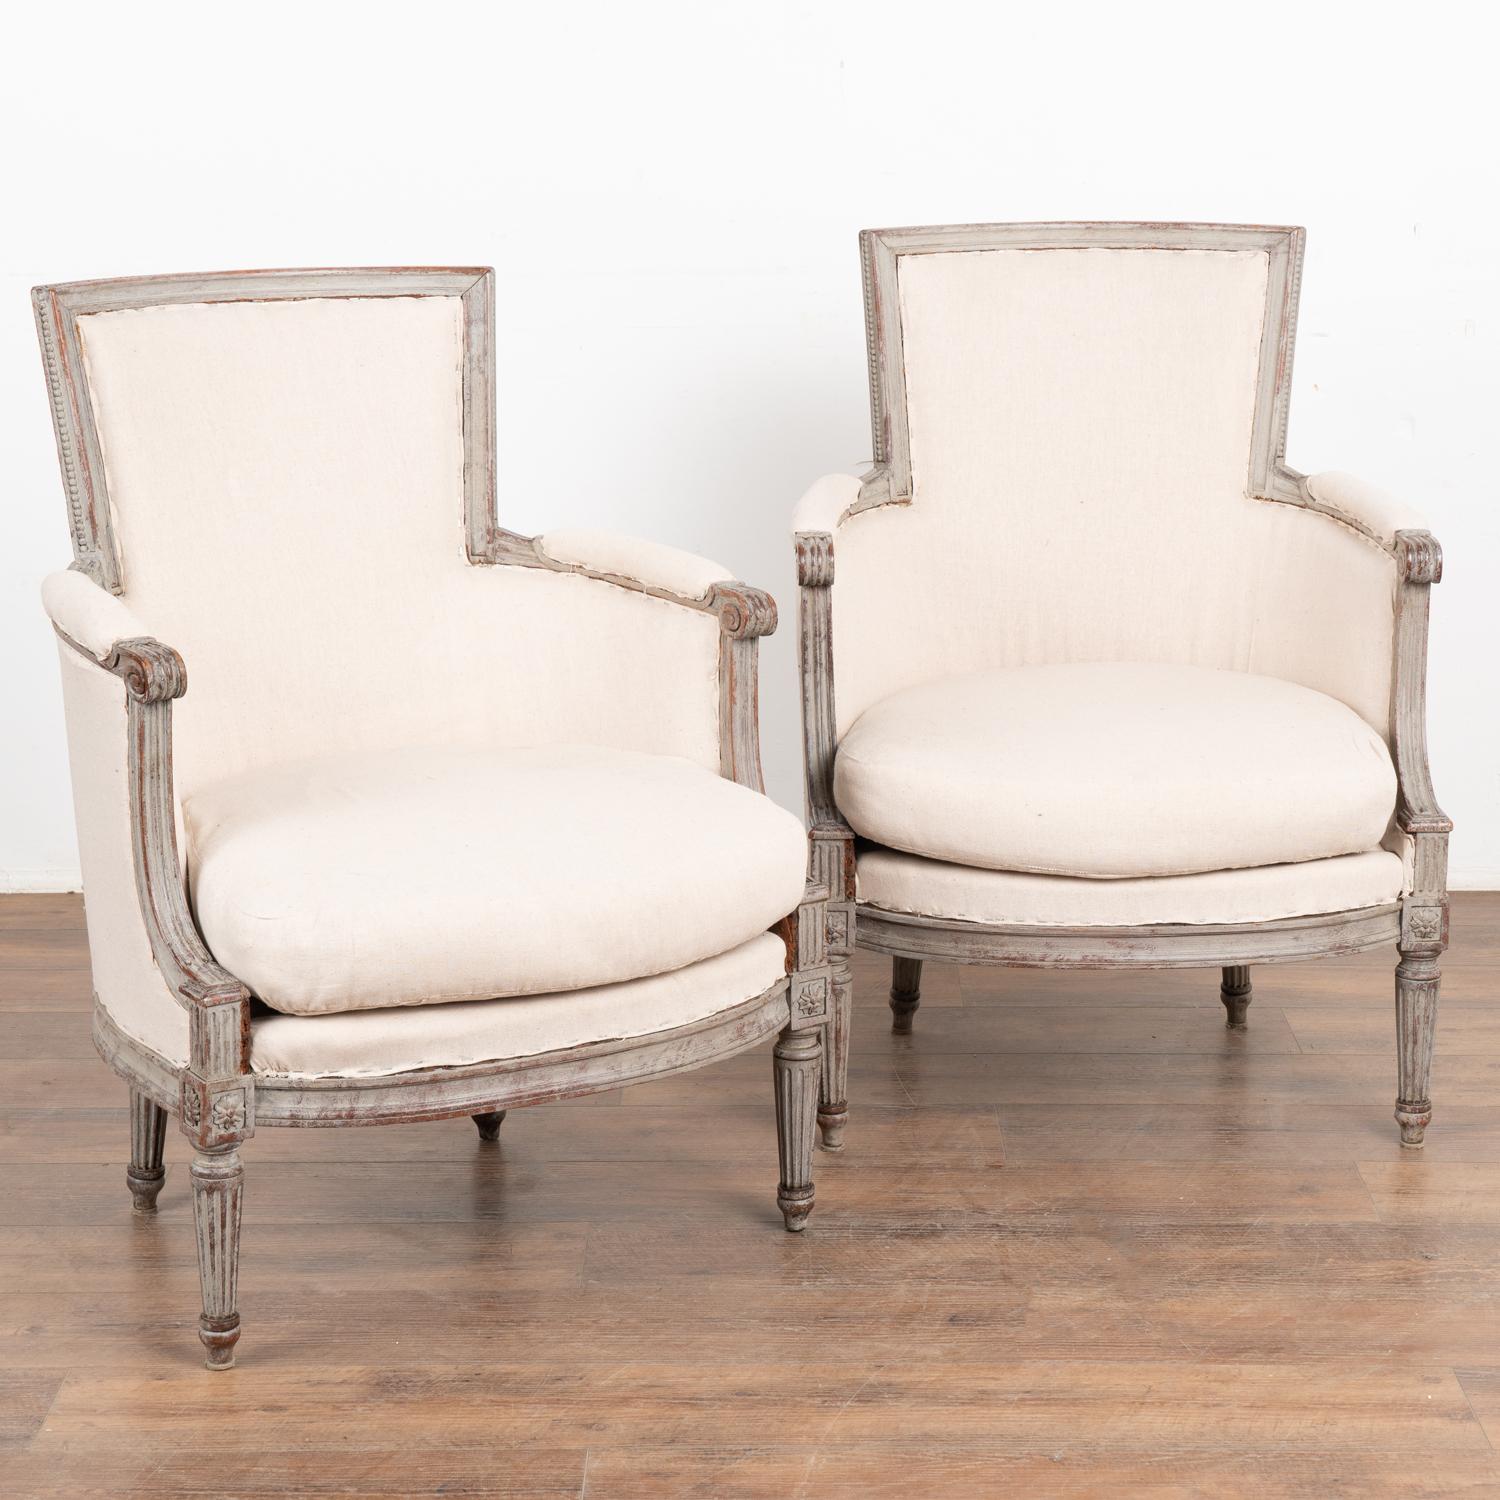 This pair of Swedish Gustavian style armchairs have a gently curved back, turned fluted legs and decorative carving embellishments which all add to the graceful appeal of each.
The newer professionally applied antique gray layered painted finish has